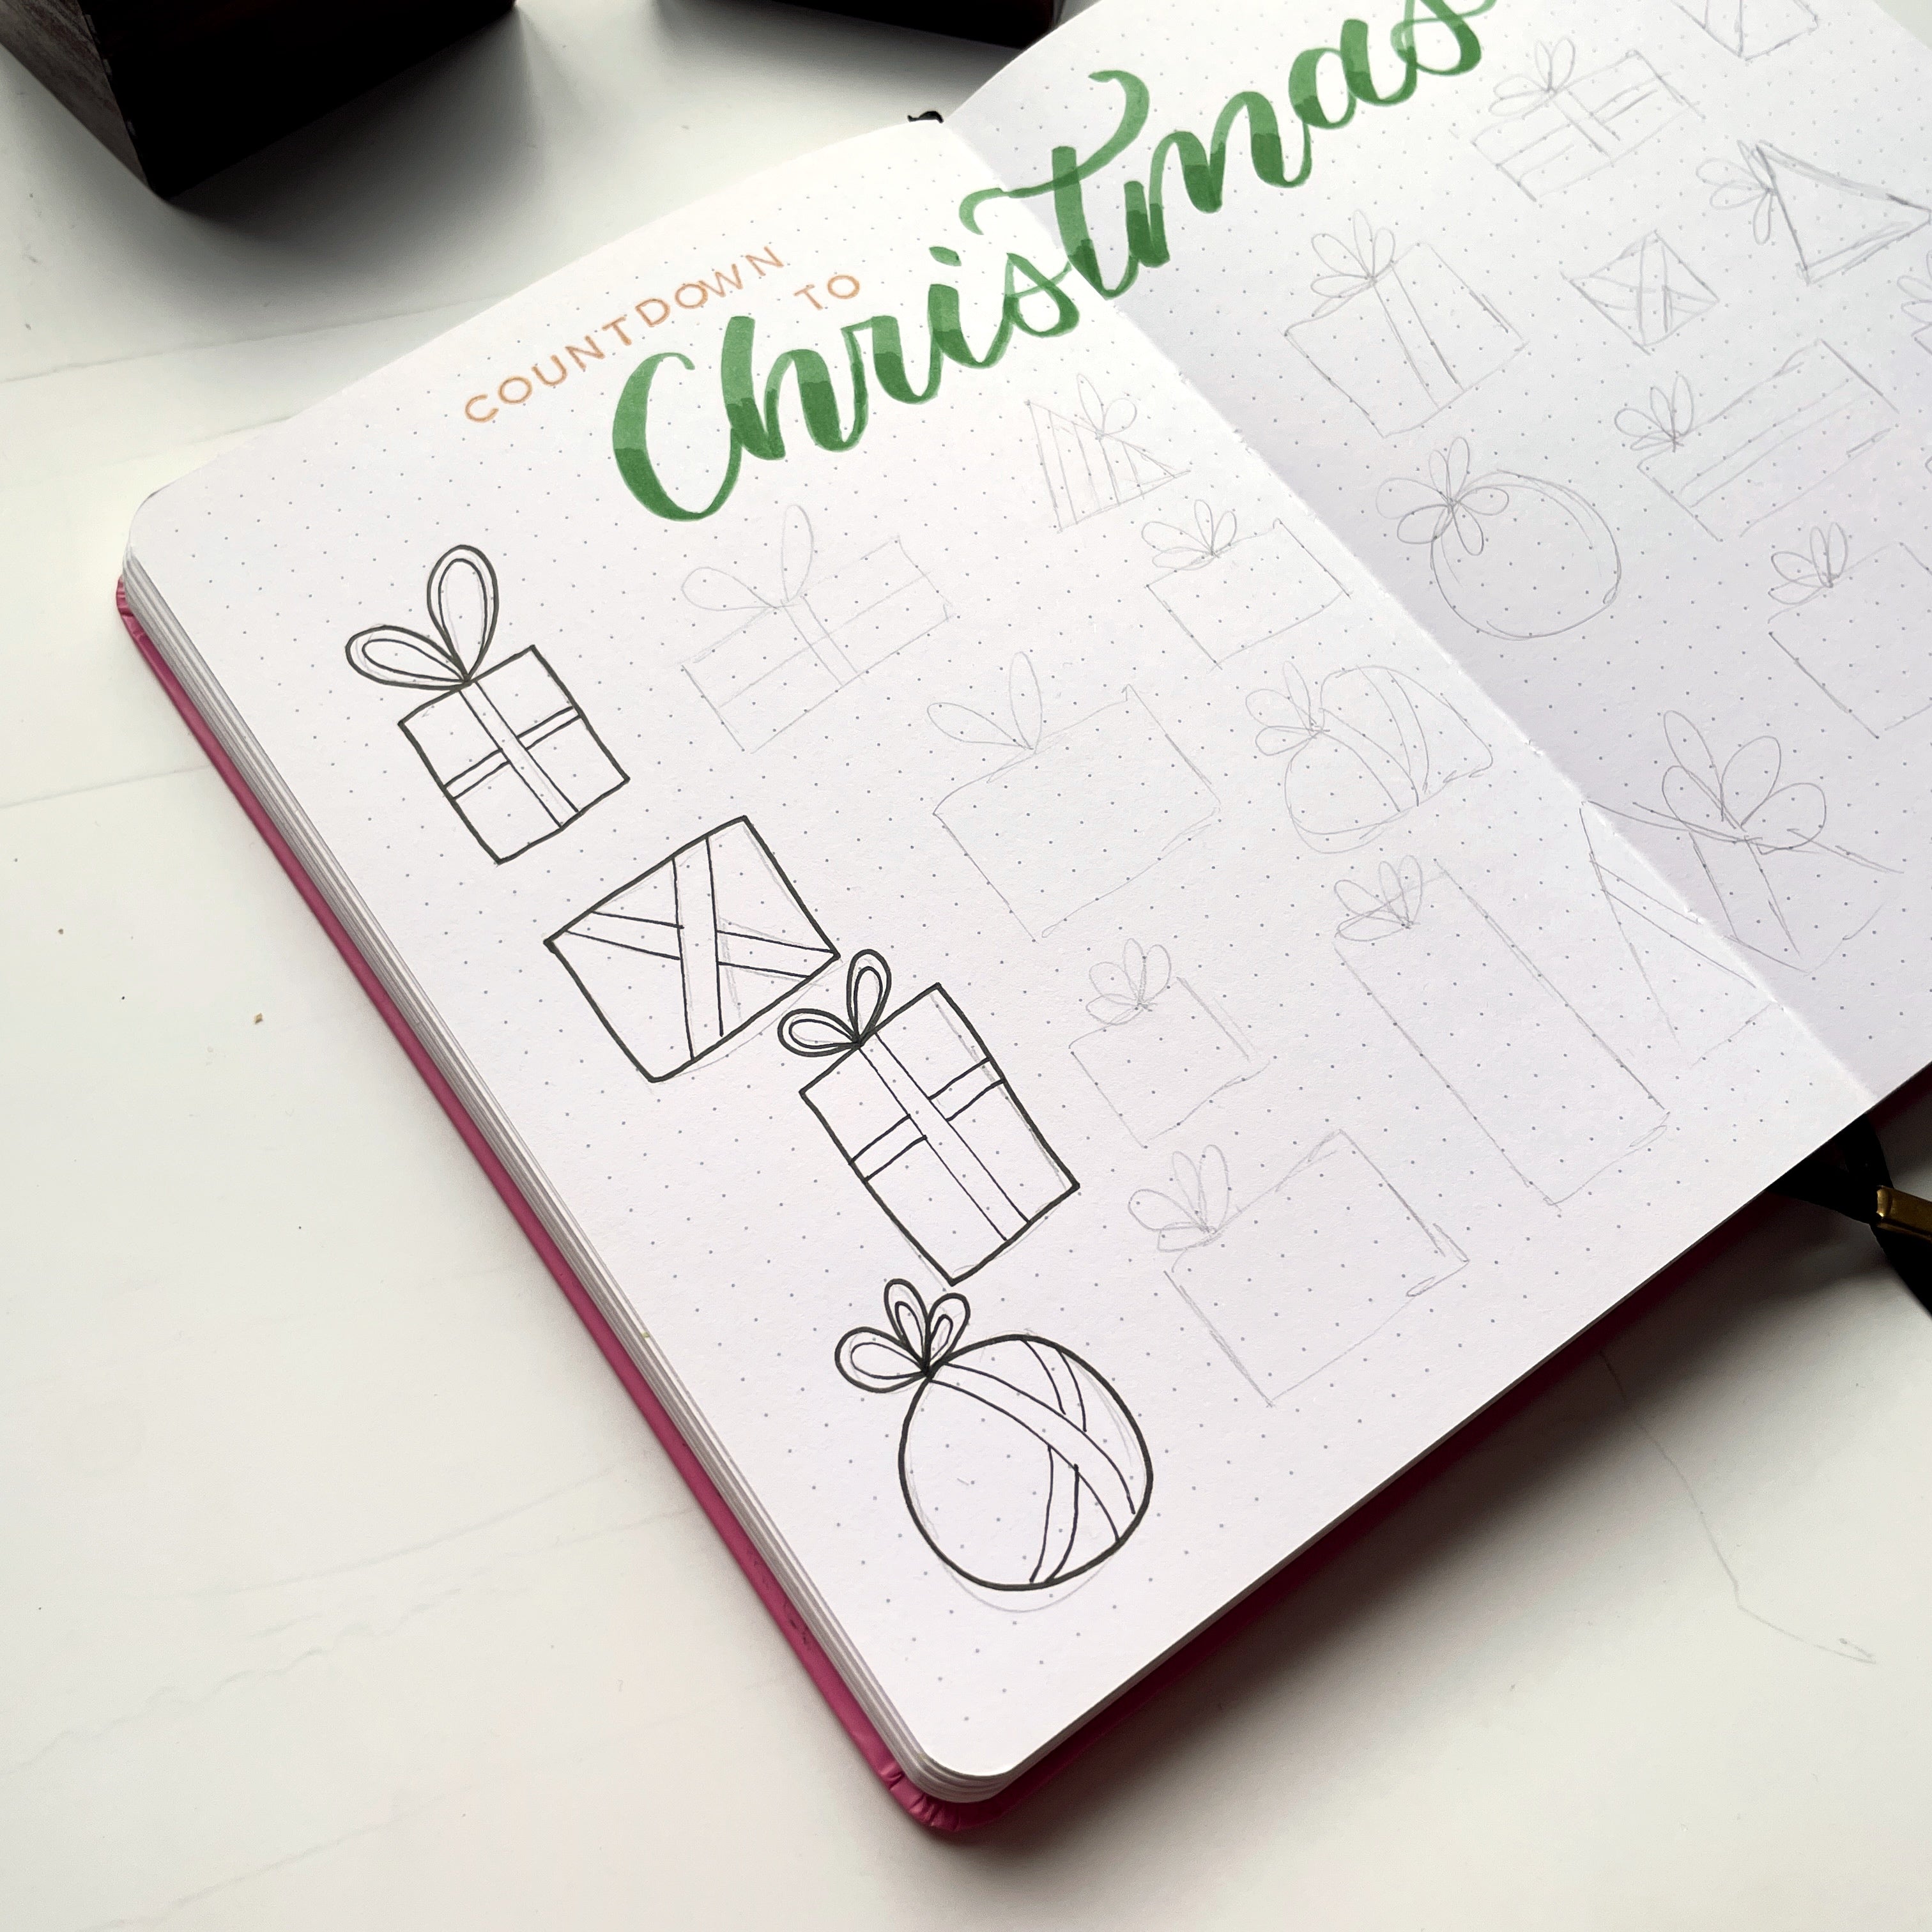 How To Create A Christmas Countdown Bullet Journal Spread